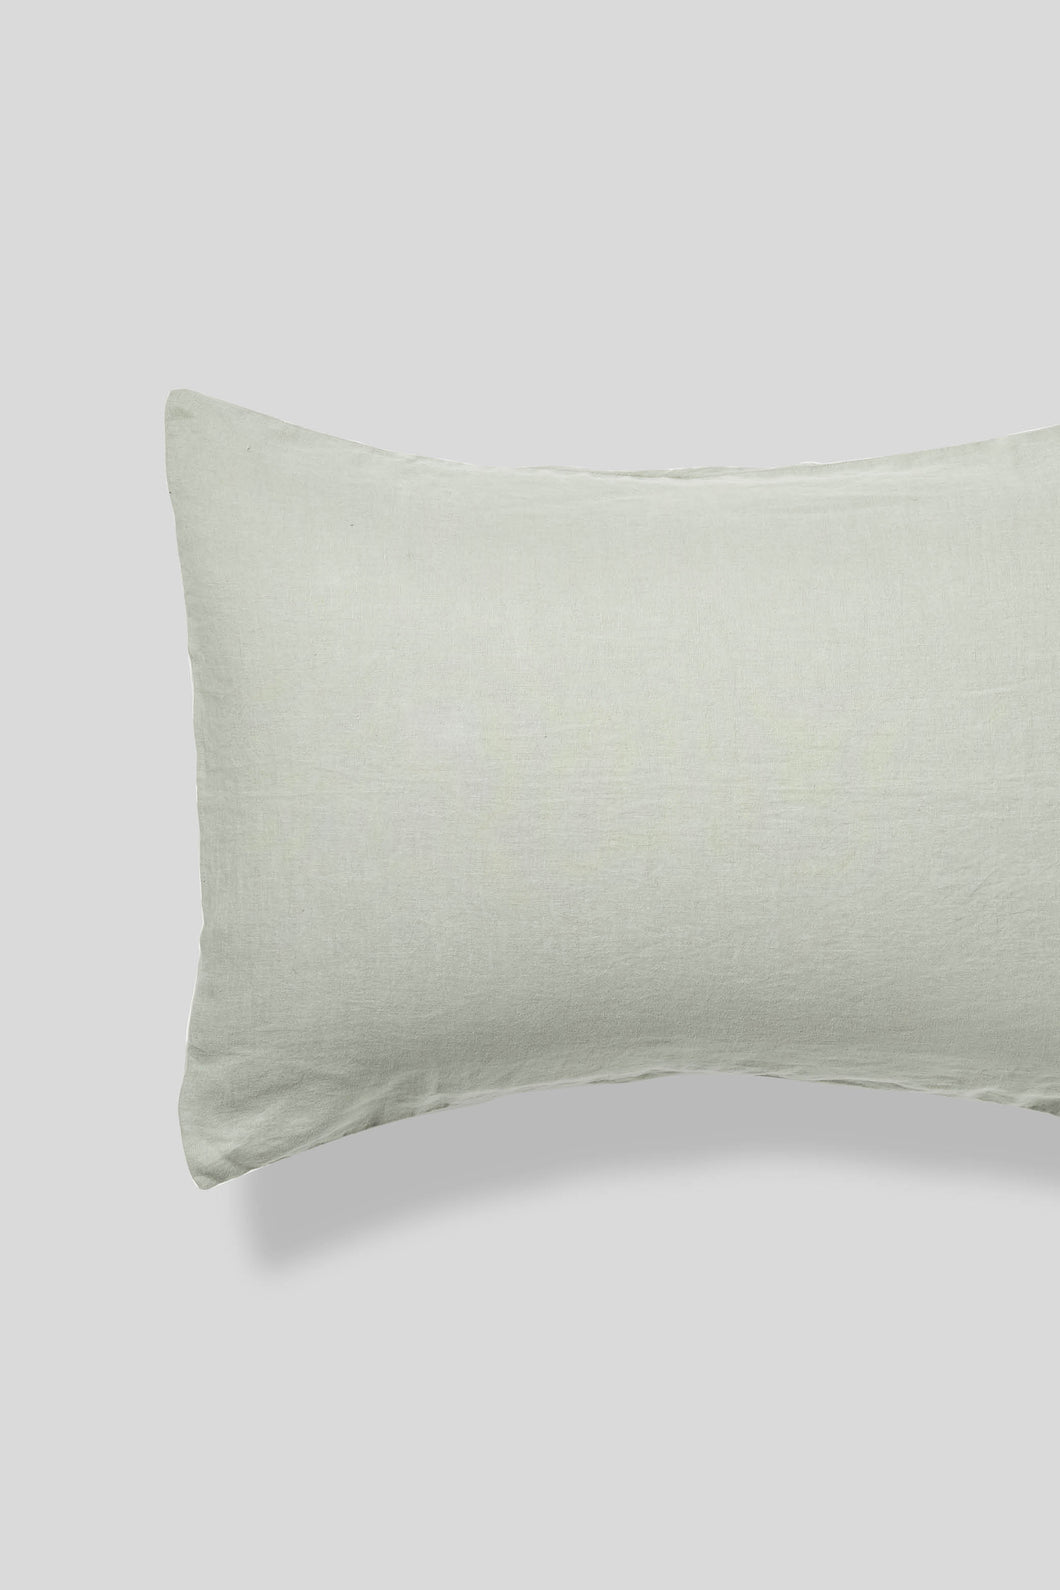 100% Linen Pillowslip Set (of two) in Stone